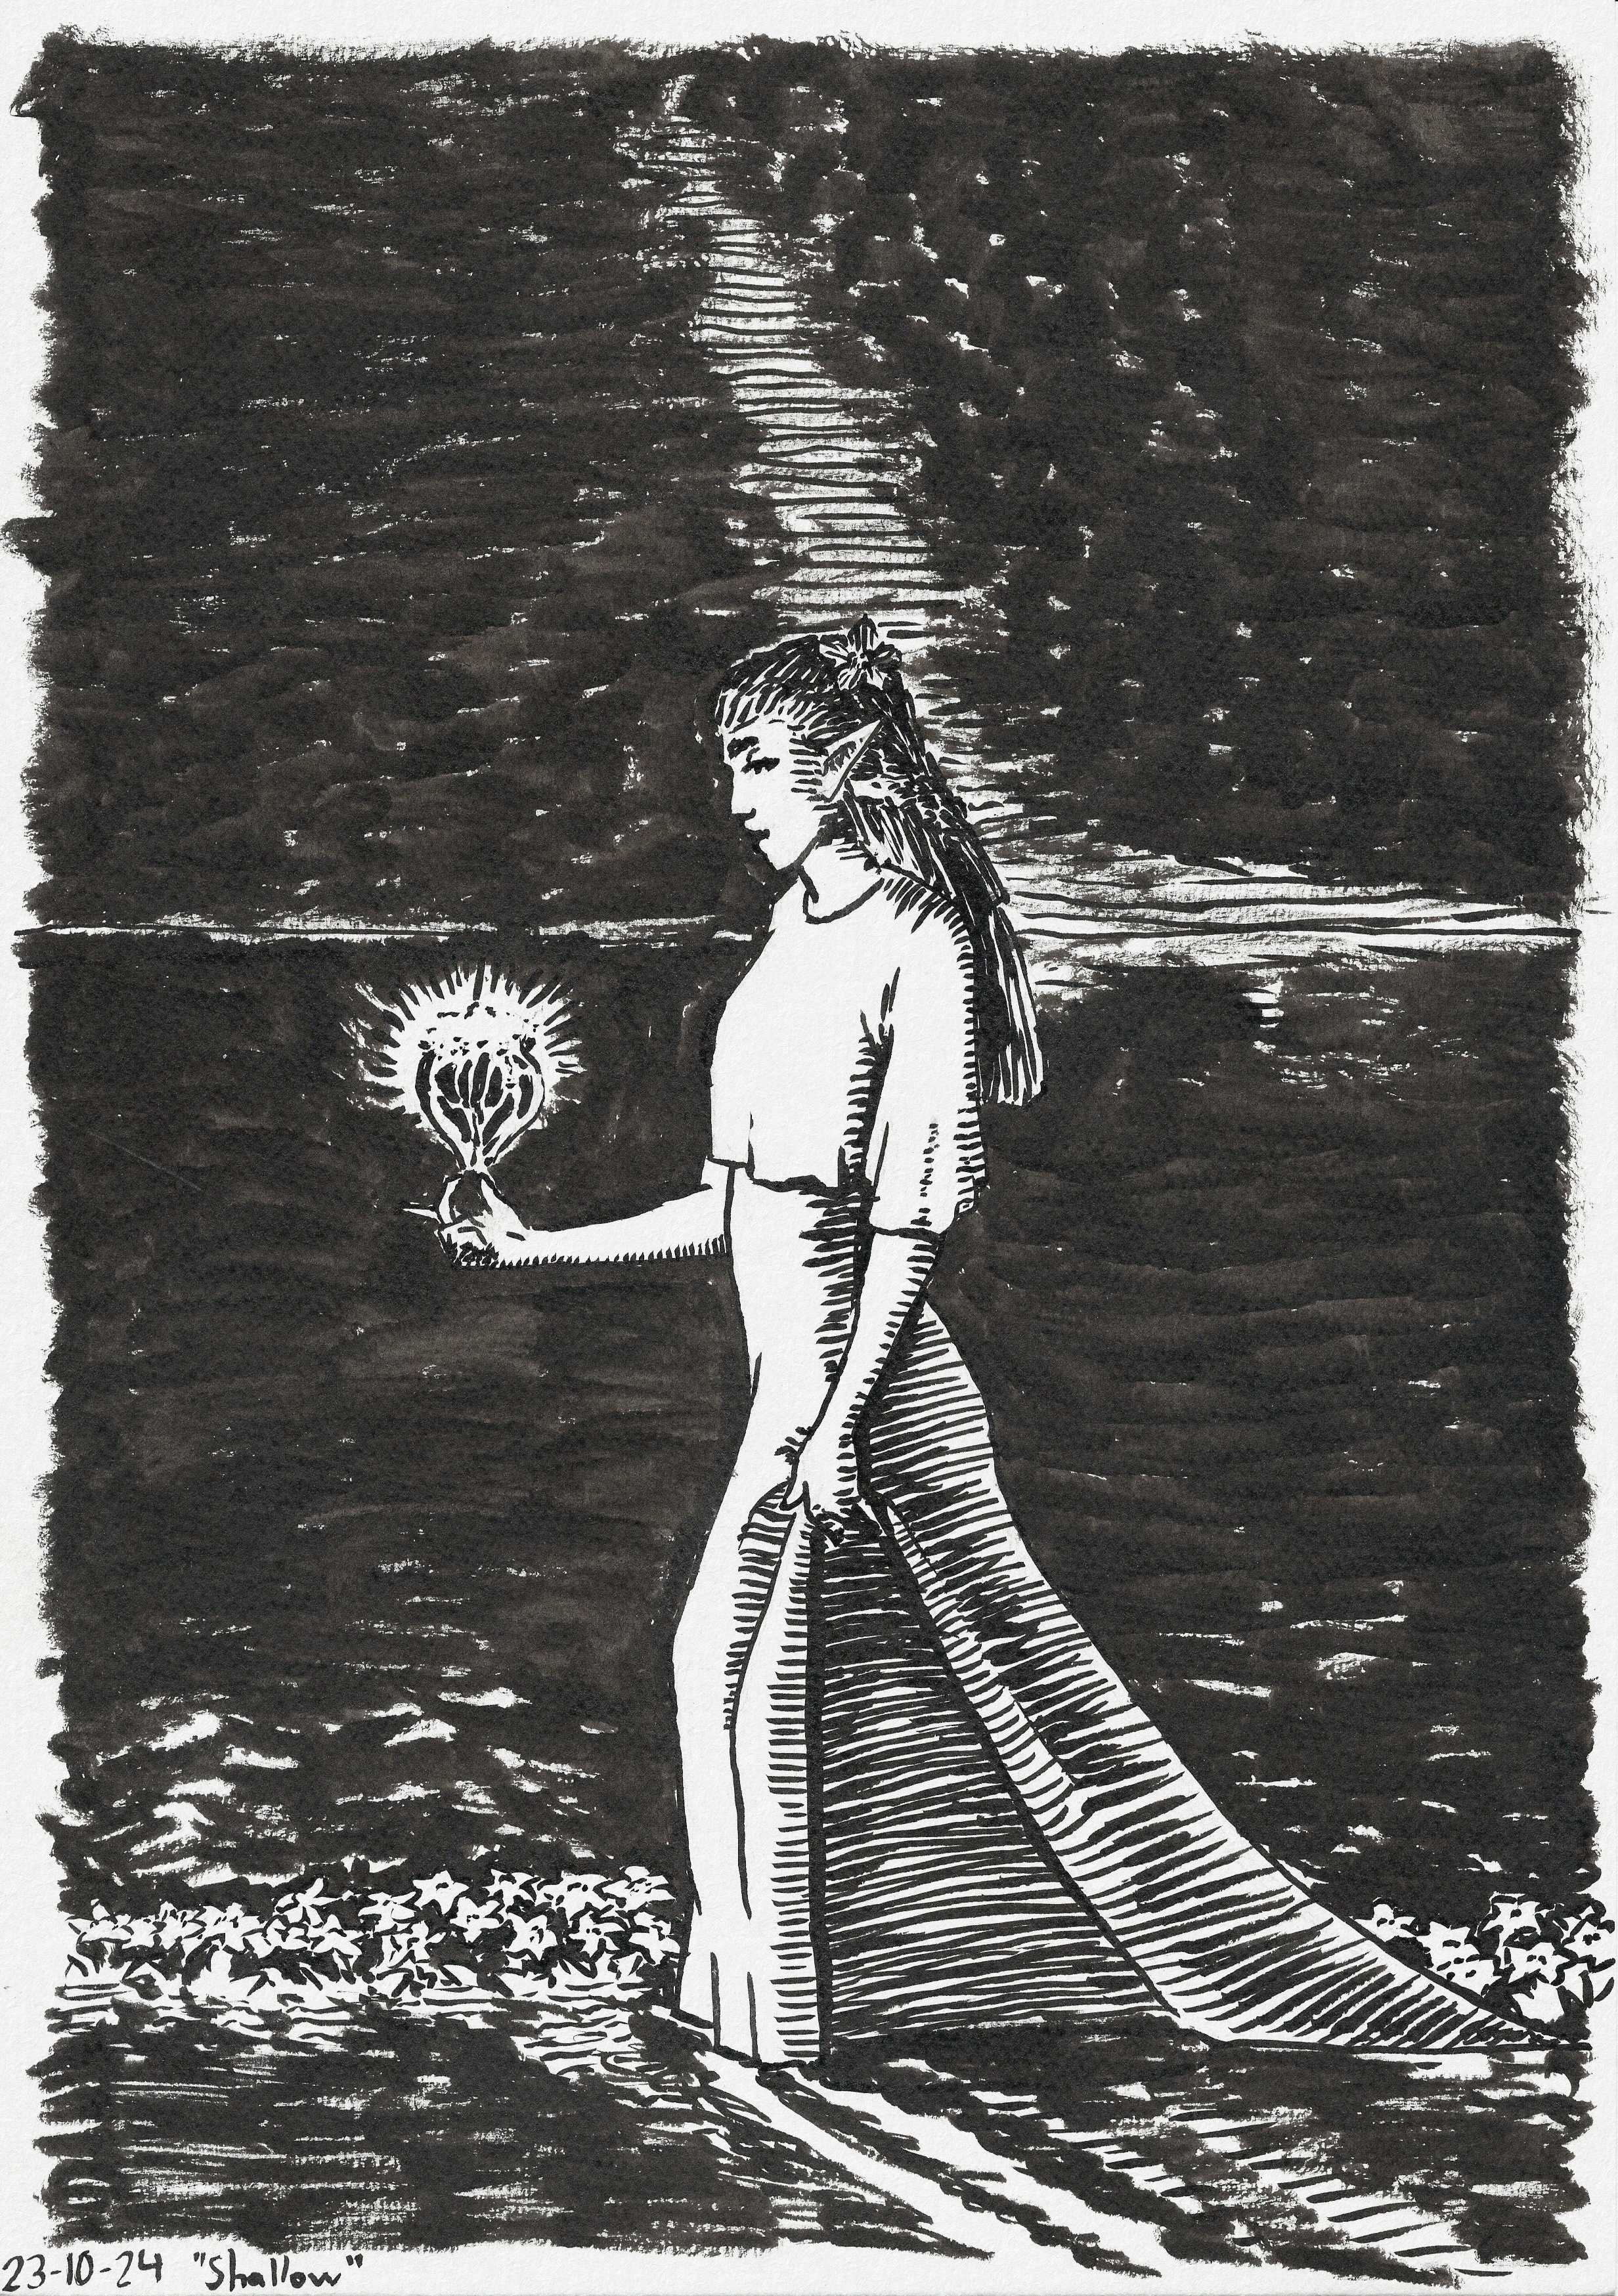 An elven woman in a long dress walking in shallow water surrounded by flowers. She's illuminated by magical strands of light in her hand.